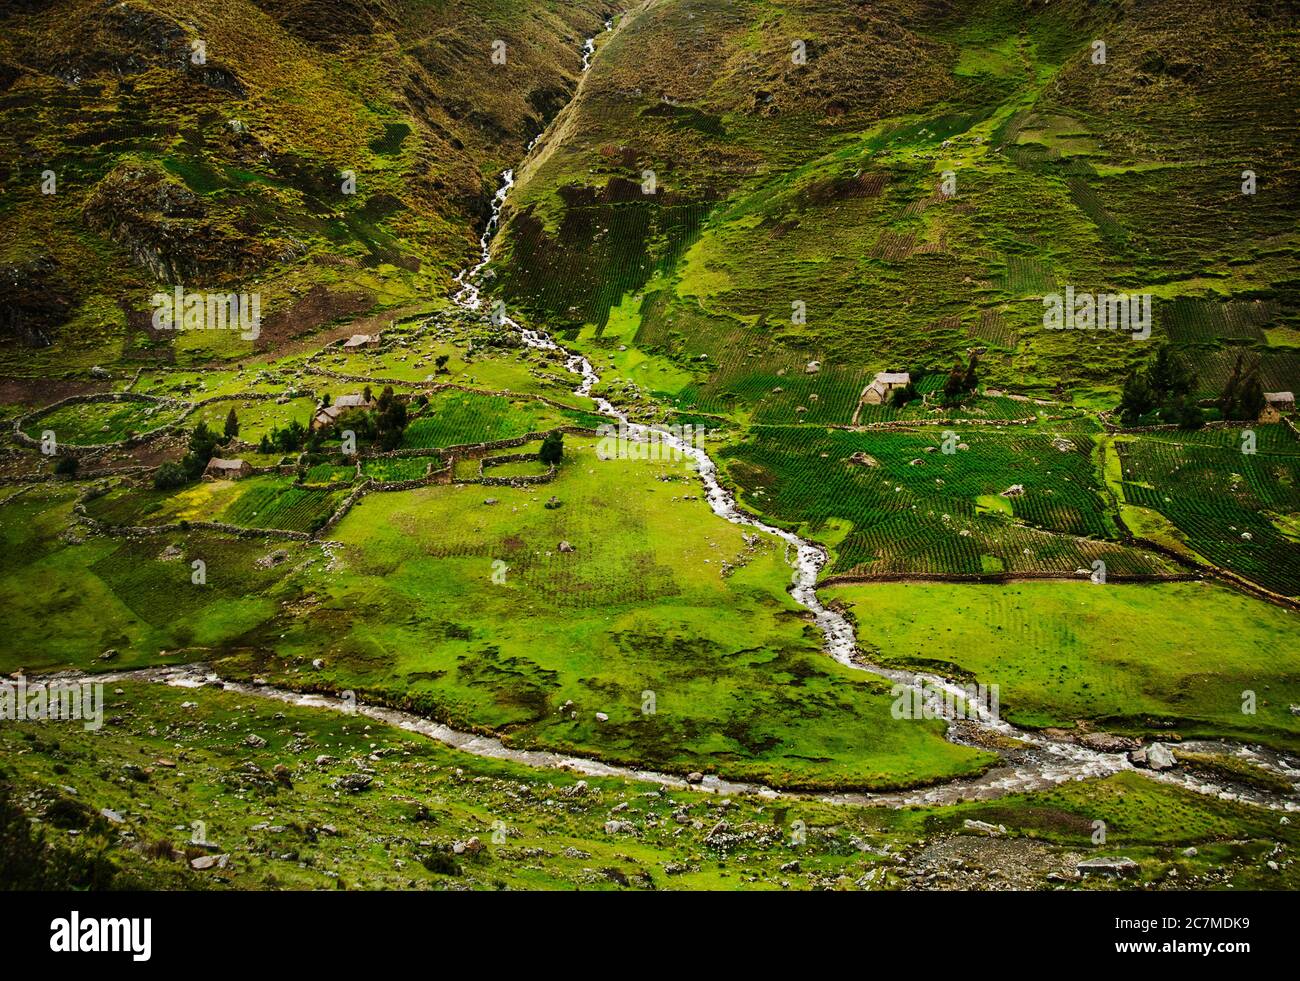 Landscape of Chaullacocha village, Andes Mountains, Peru, South America Stock Photo